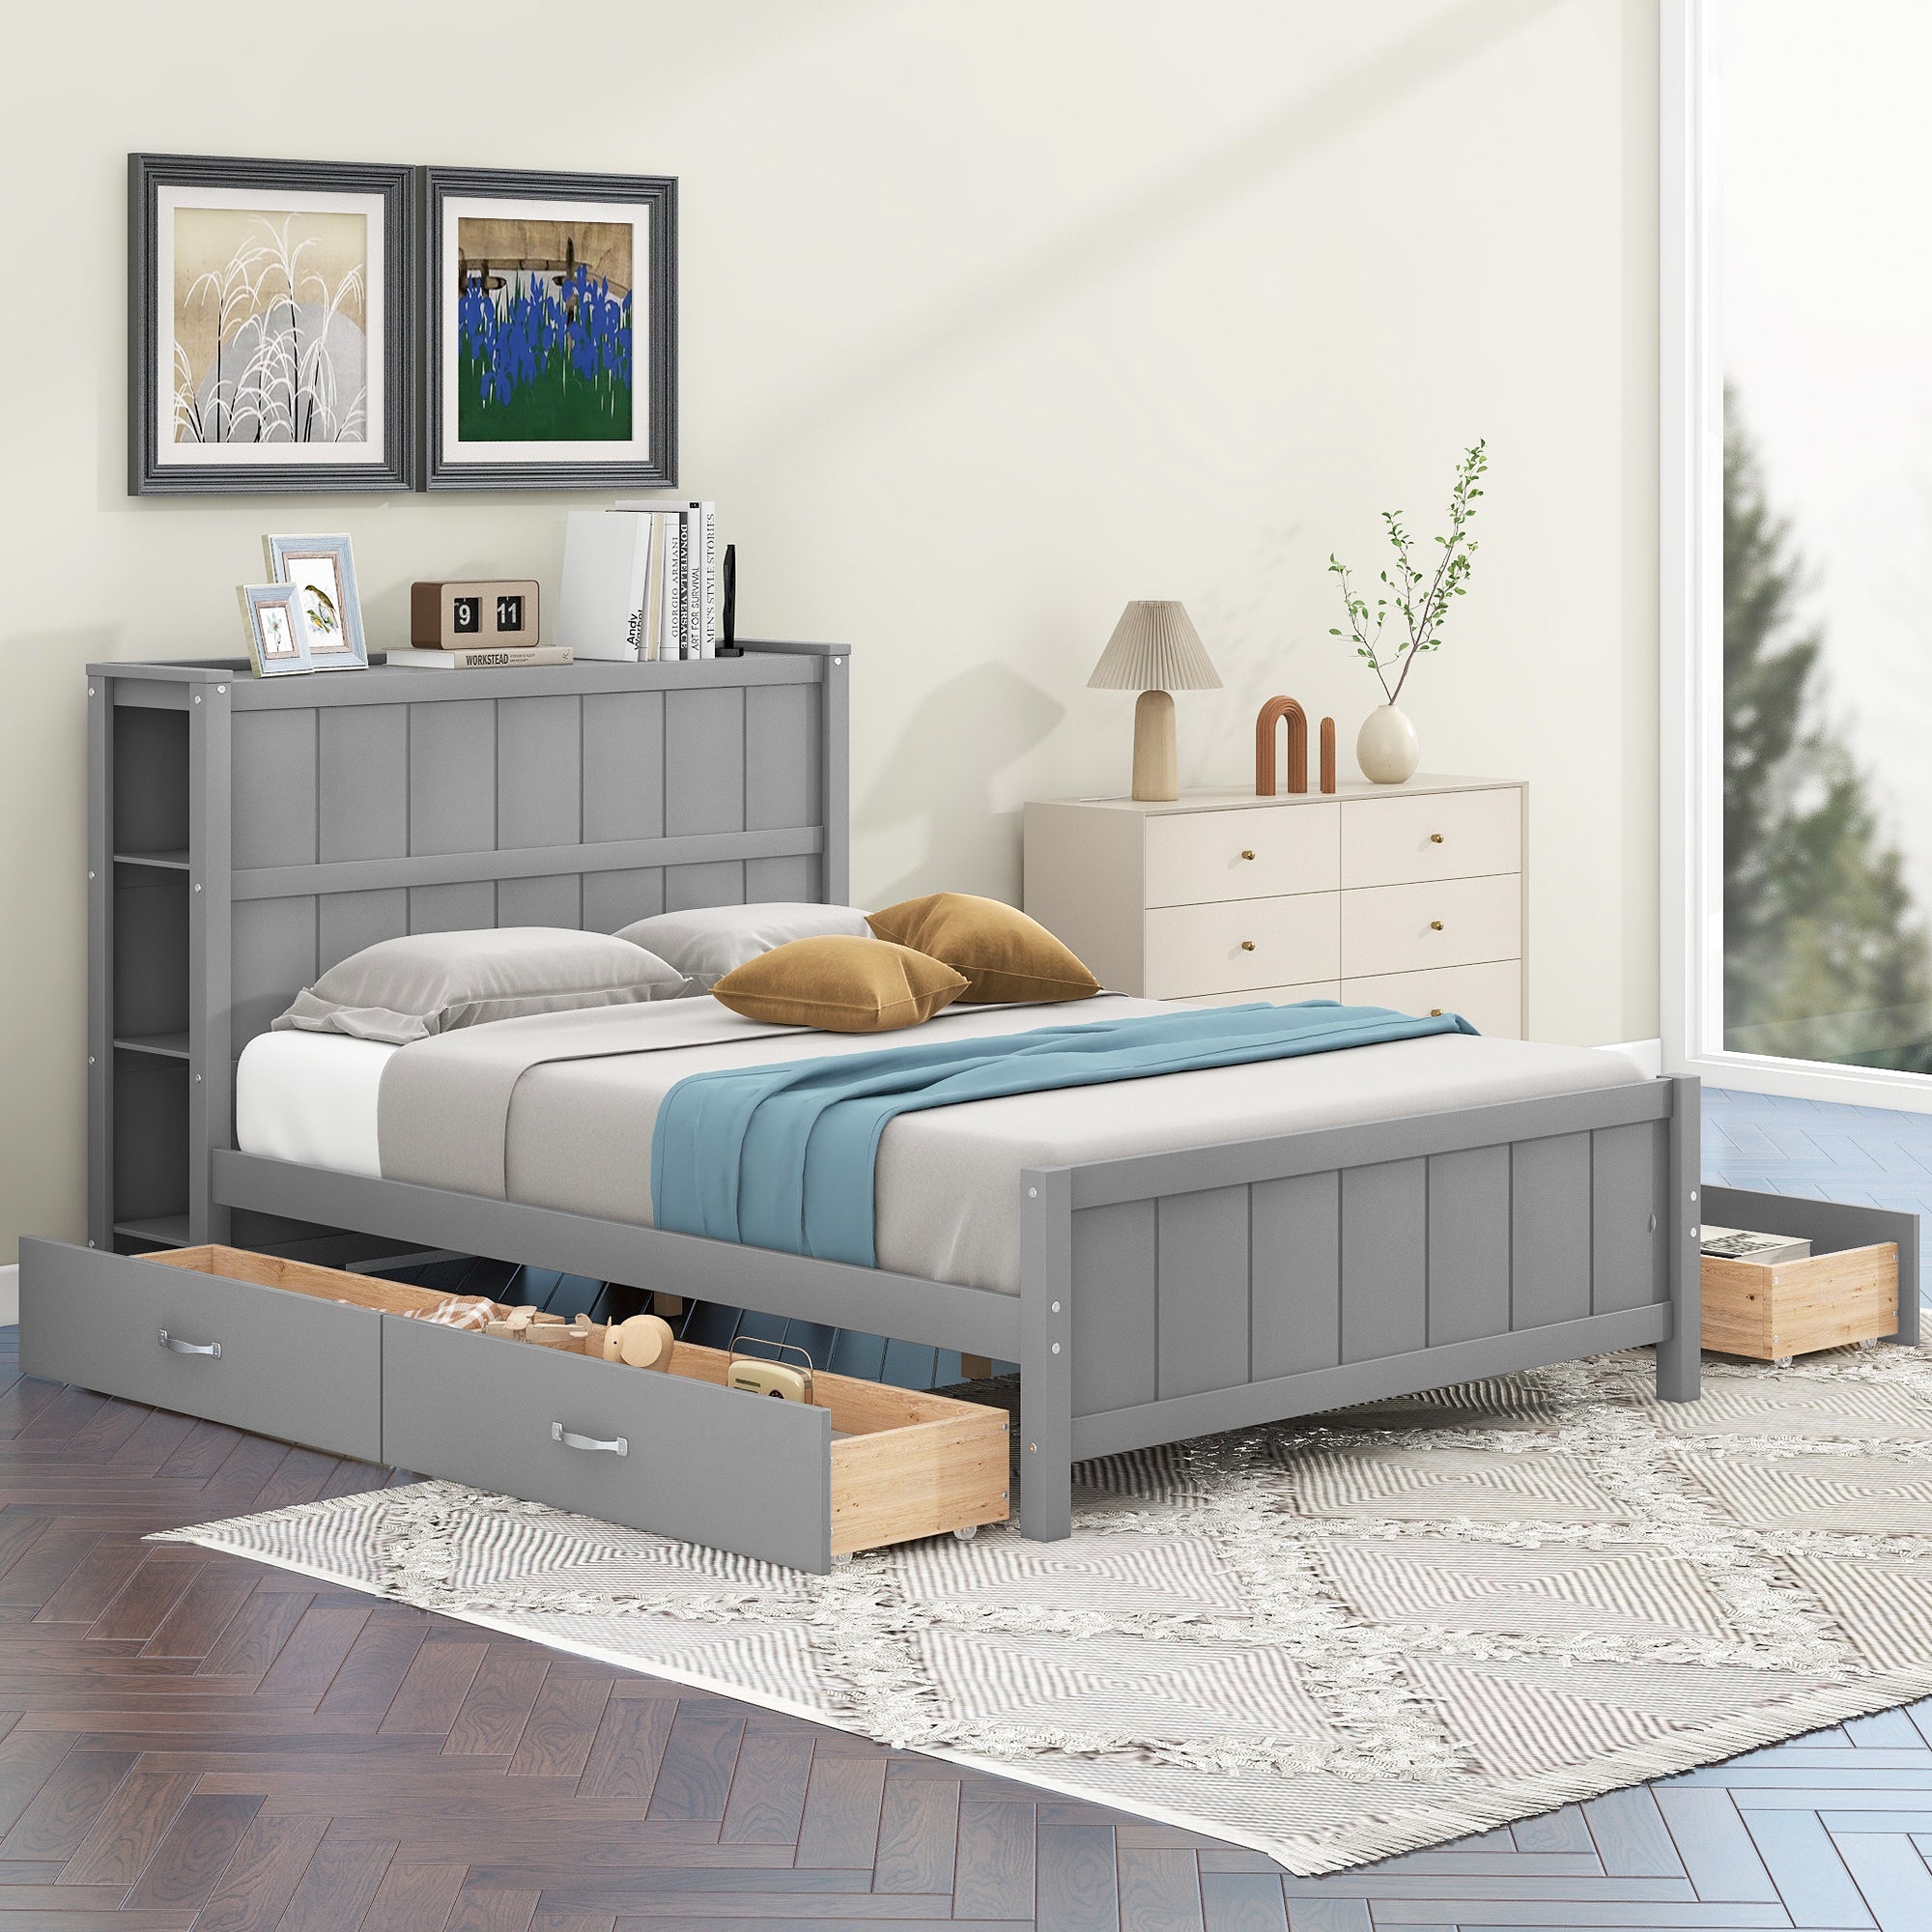 🆓🚛 Full Size Platform Bed With Drawers and Storage Shelves, Gray